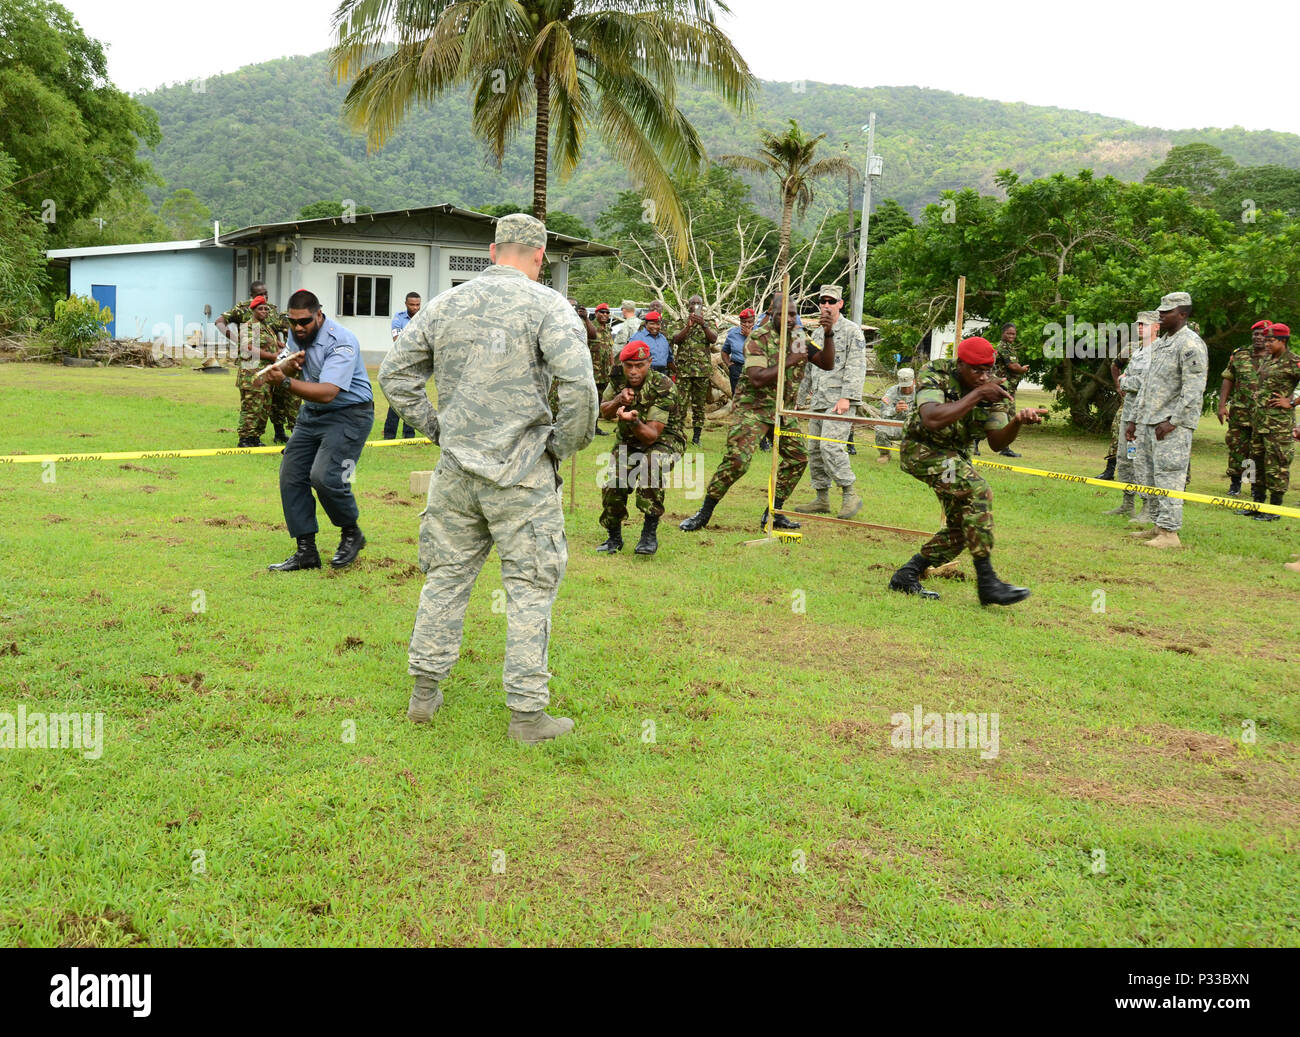 CHAGUARAMAS, Trinidad-  Members of the Delaware National Guard and Trinidad and Tobago Defence Force participated in a simulated room clearance training demonstration on August 10, 2016. (U.S Air National Guard photo by TSgt Gwendolyn Blakley) Stock Photo